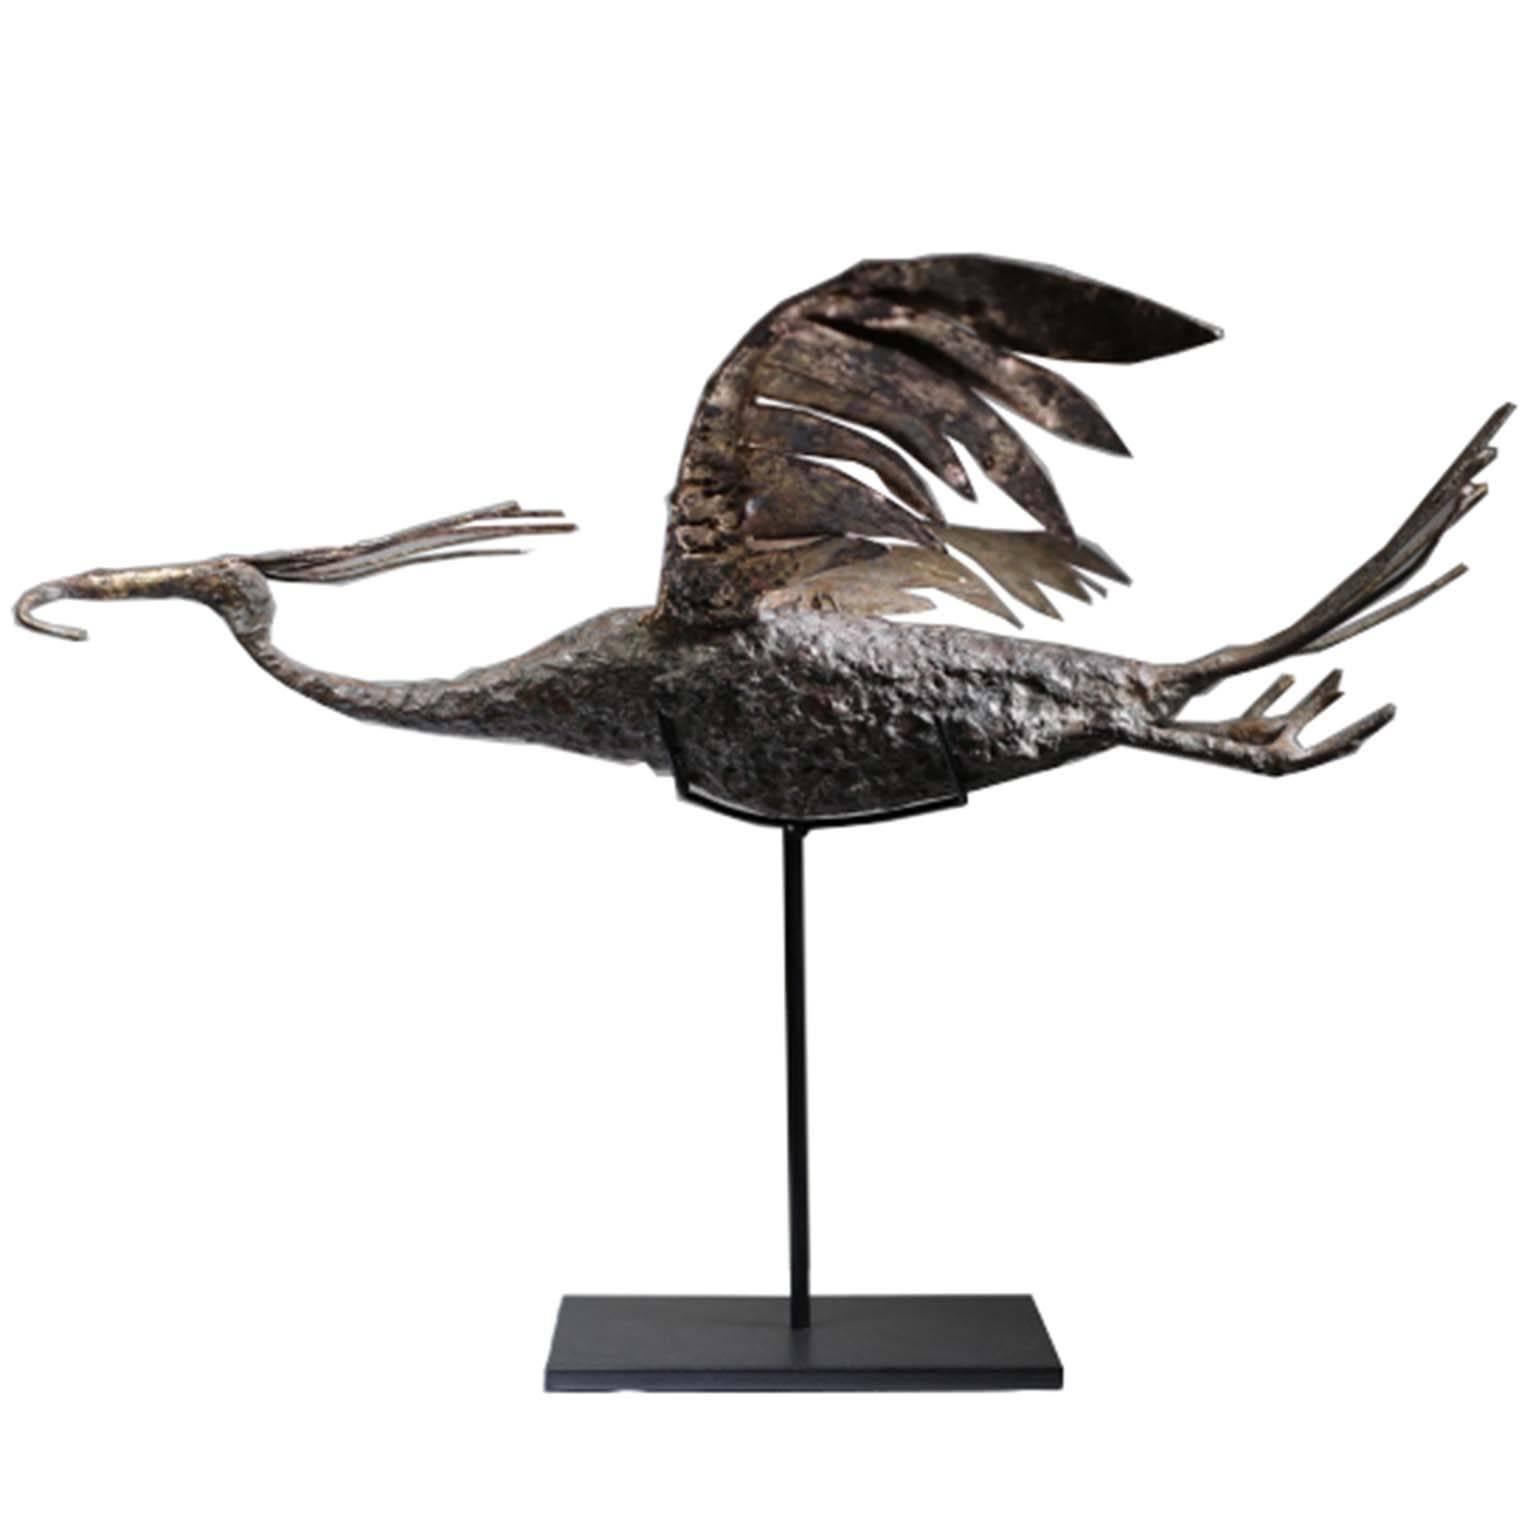 Brutalist bronze, copper, brass bird sculpture on custom steel stand, circa 1960s. Artist unknown. Unknown if beak has been bent or if this was intentionally done by the artist.